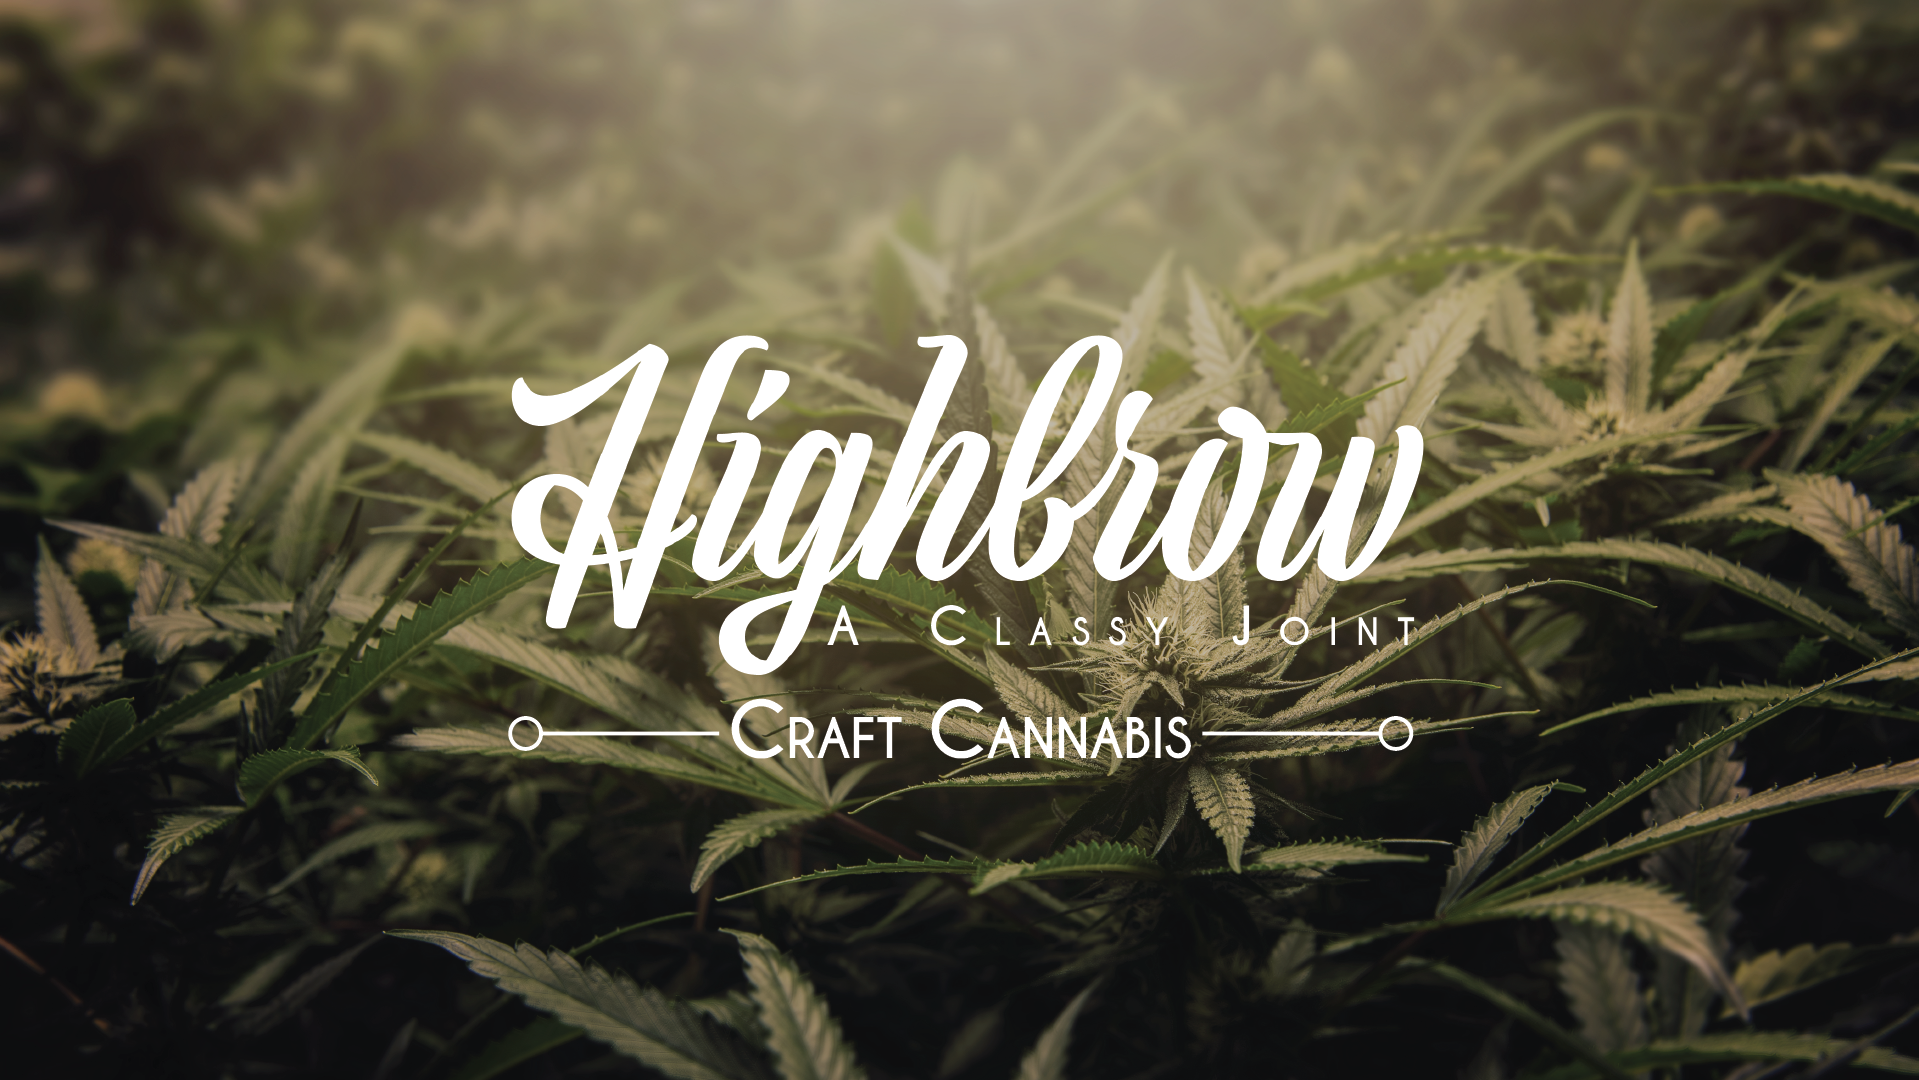 leafly highbrow manchester